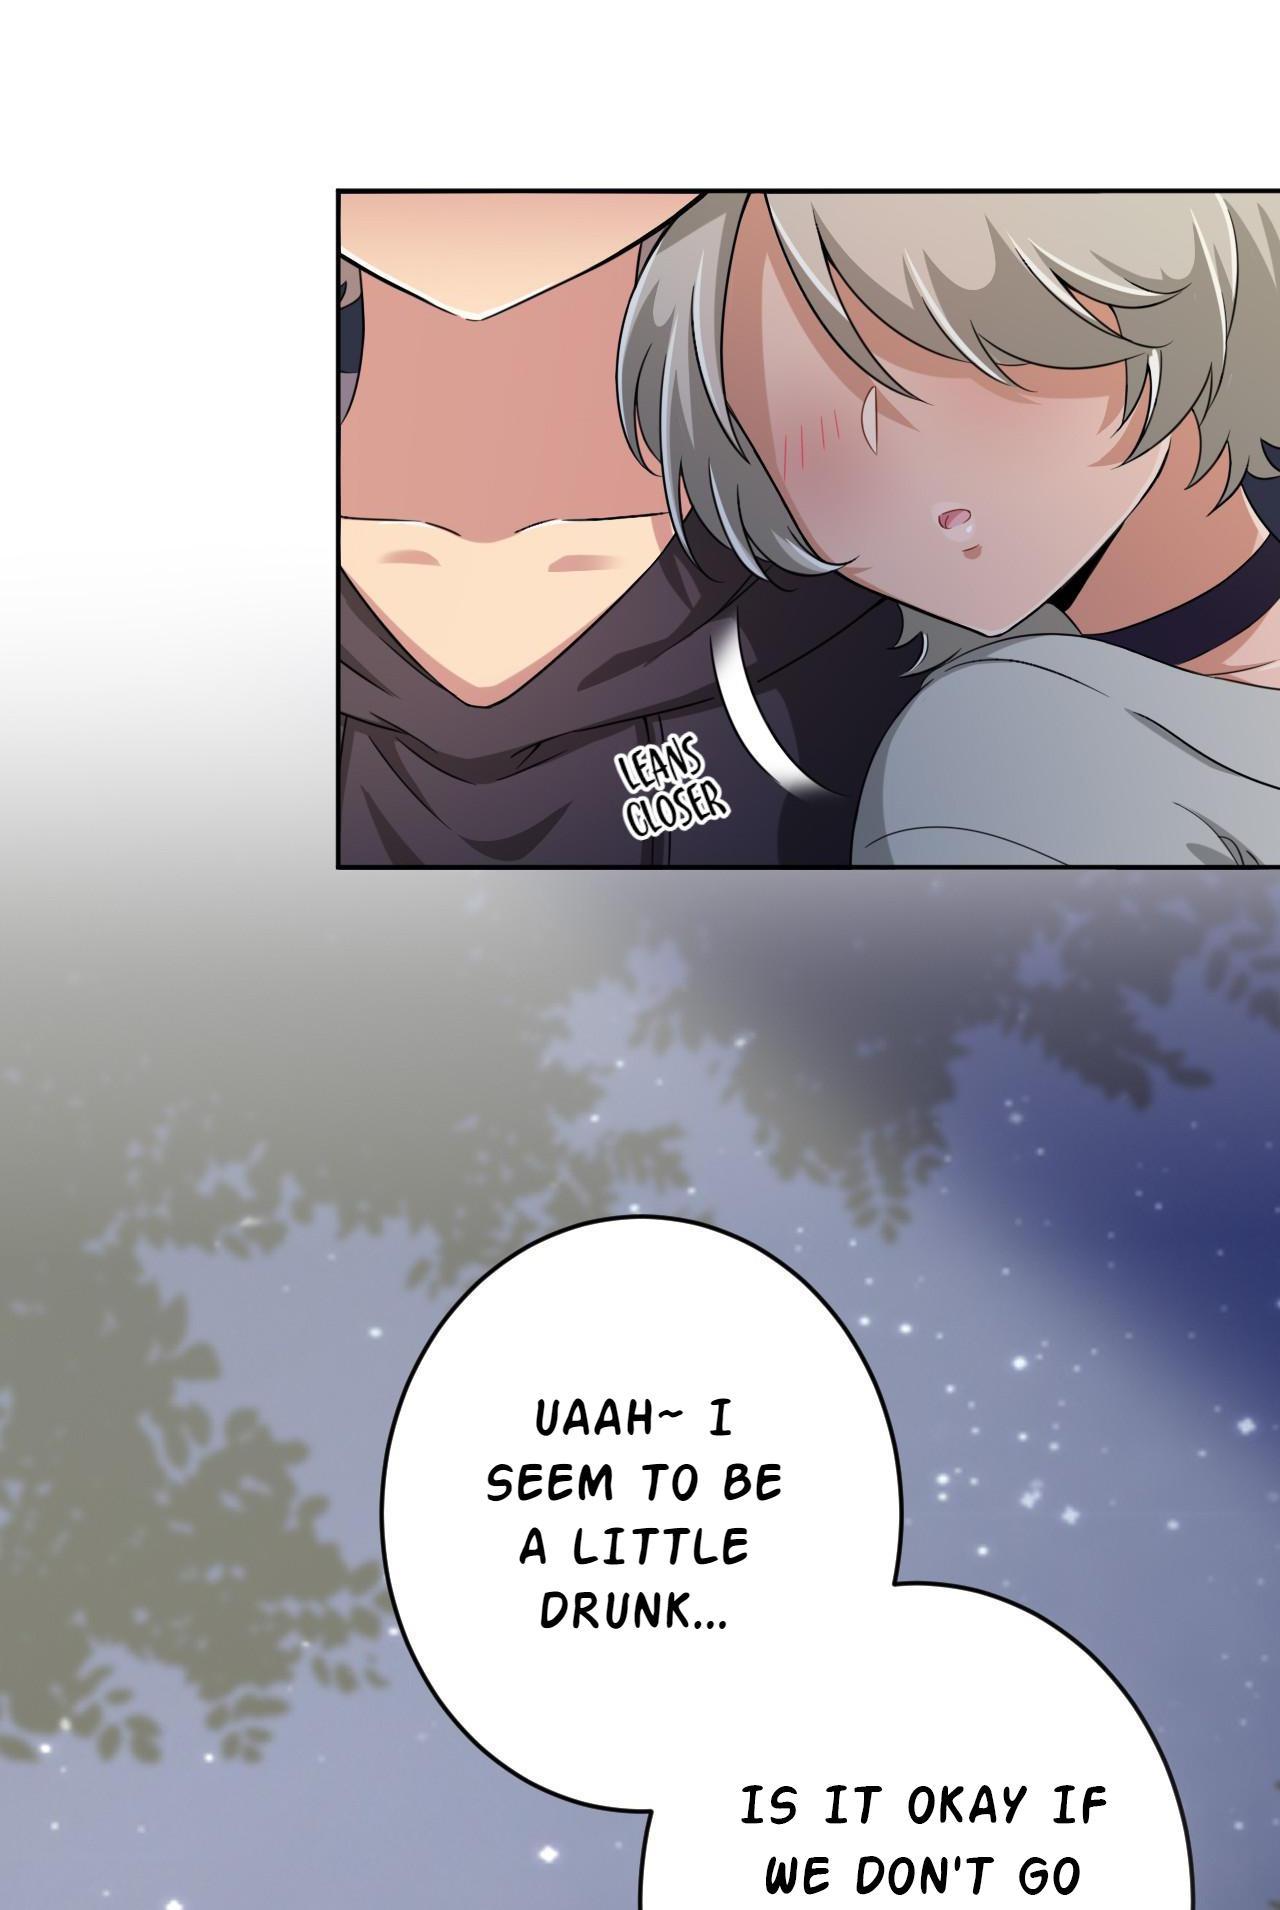 God Gave Me This Awkward Superpower, What Is It For? Vol.1 Chapter 18: Master, Why Don't We Stay Out Tonight~ page 27 - Mangakakalots.com